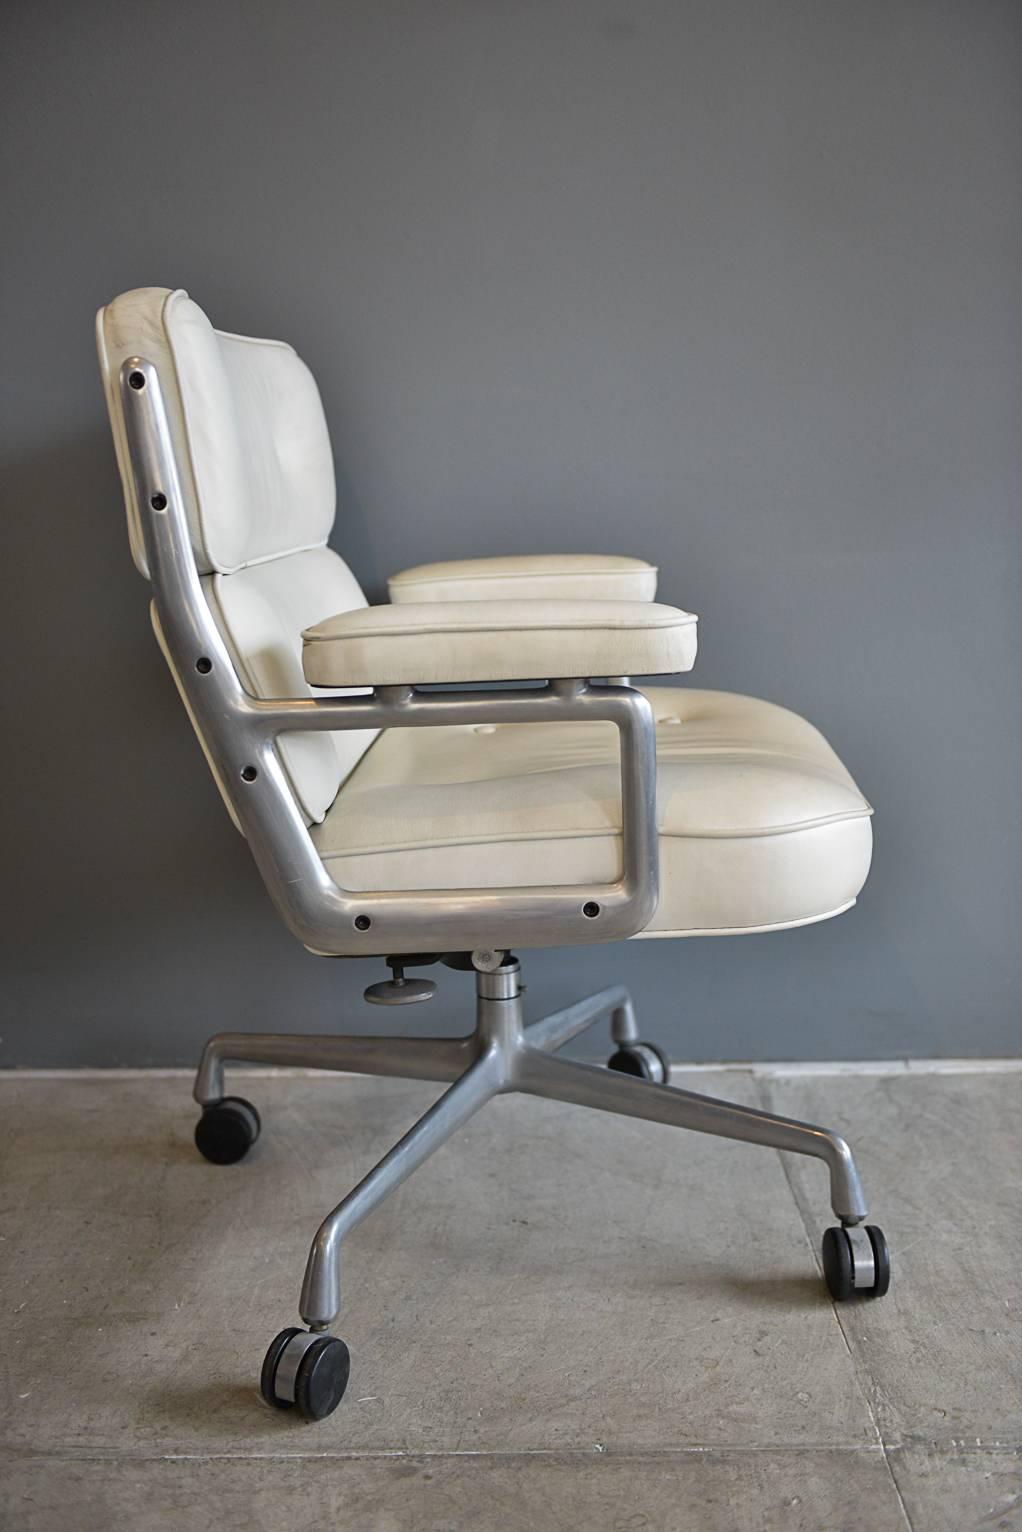 Original white leather Charles Eames for Herman Miller time life chair with brushed aluminum four-star base. Very good original condition, all buttons intact leather is very good. Manufactured circa 1988.

Measures: H 35 in., W 26 in., D 26 in.